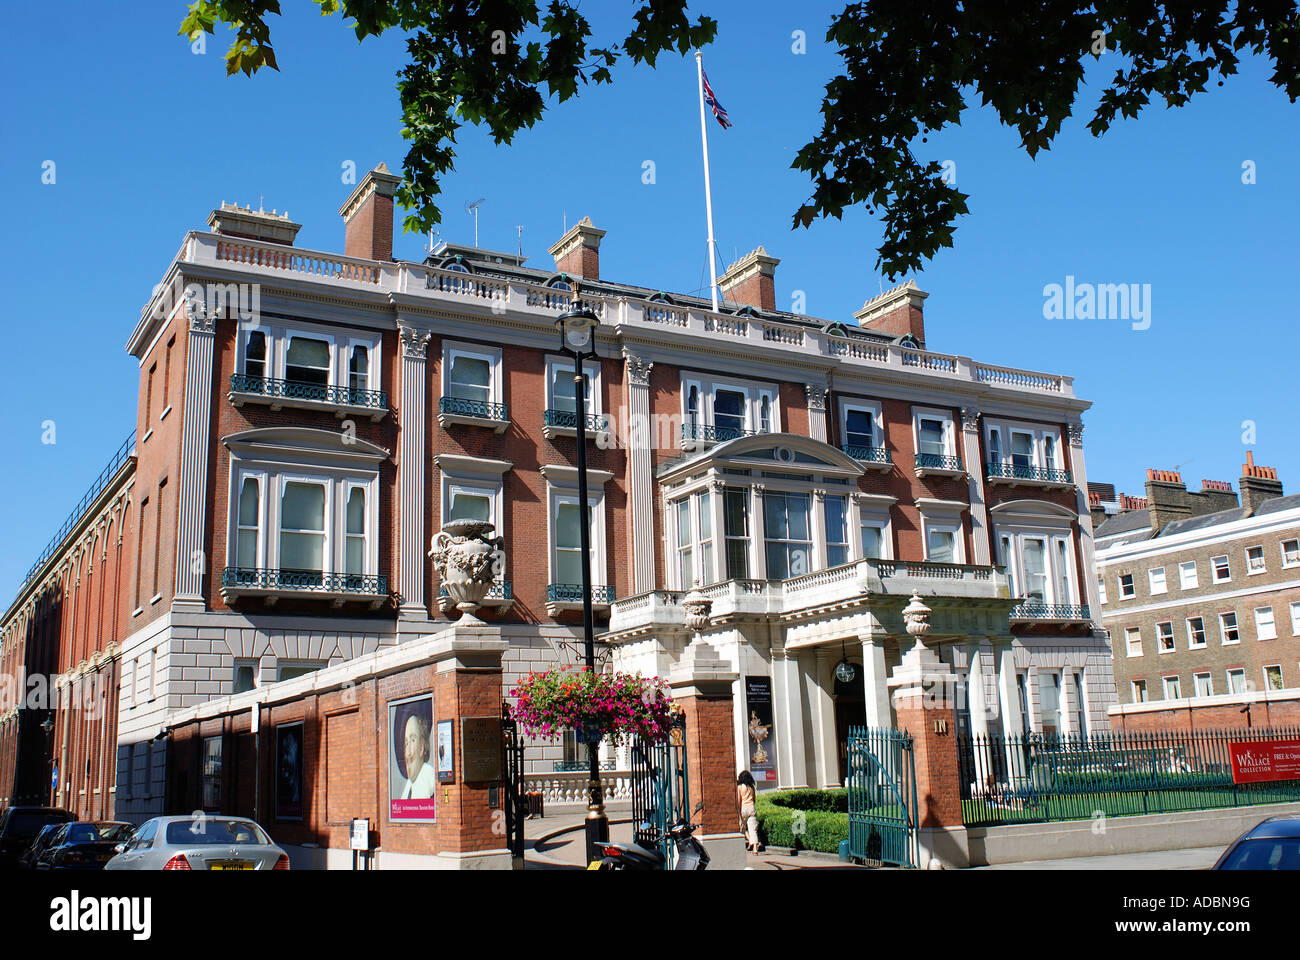 THE WALLACE COLLECTION ART GALLERY AND MUSEUM HERTFORD HOUSE MANCHESTER SQUARE LONDON Stock Photo